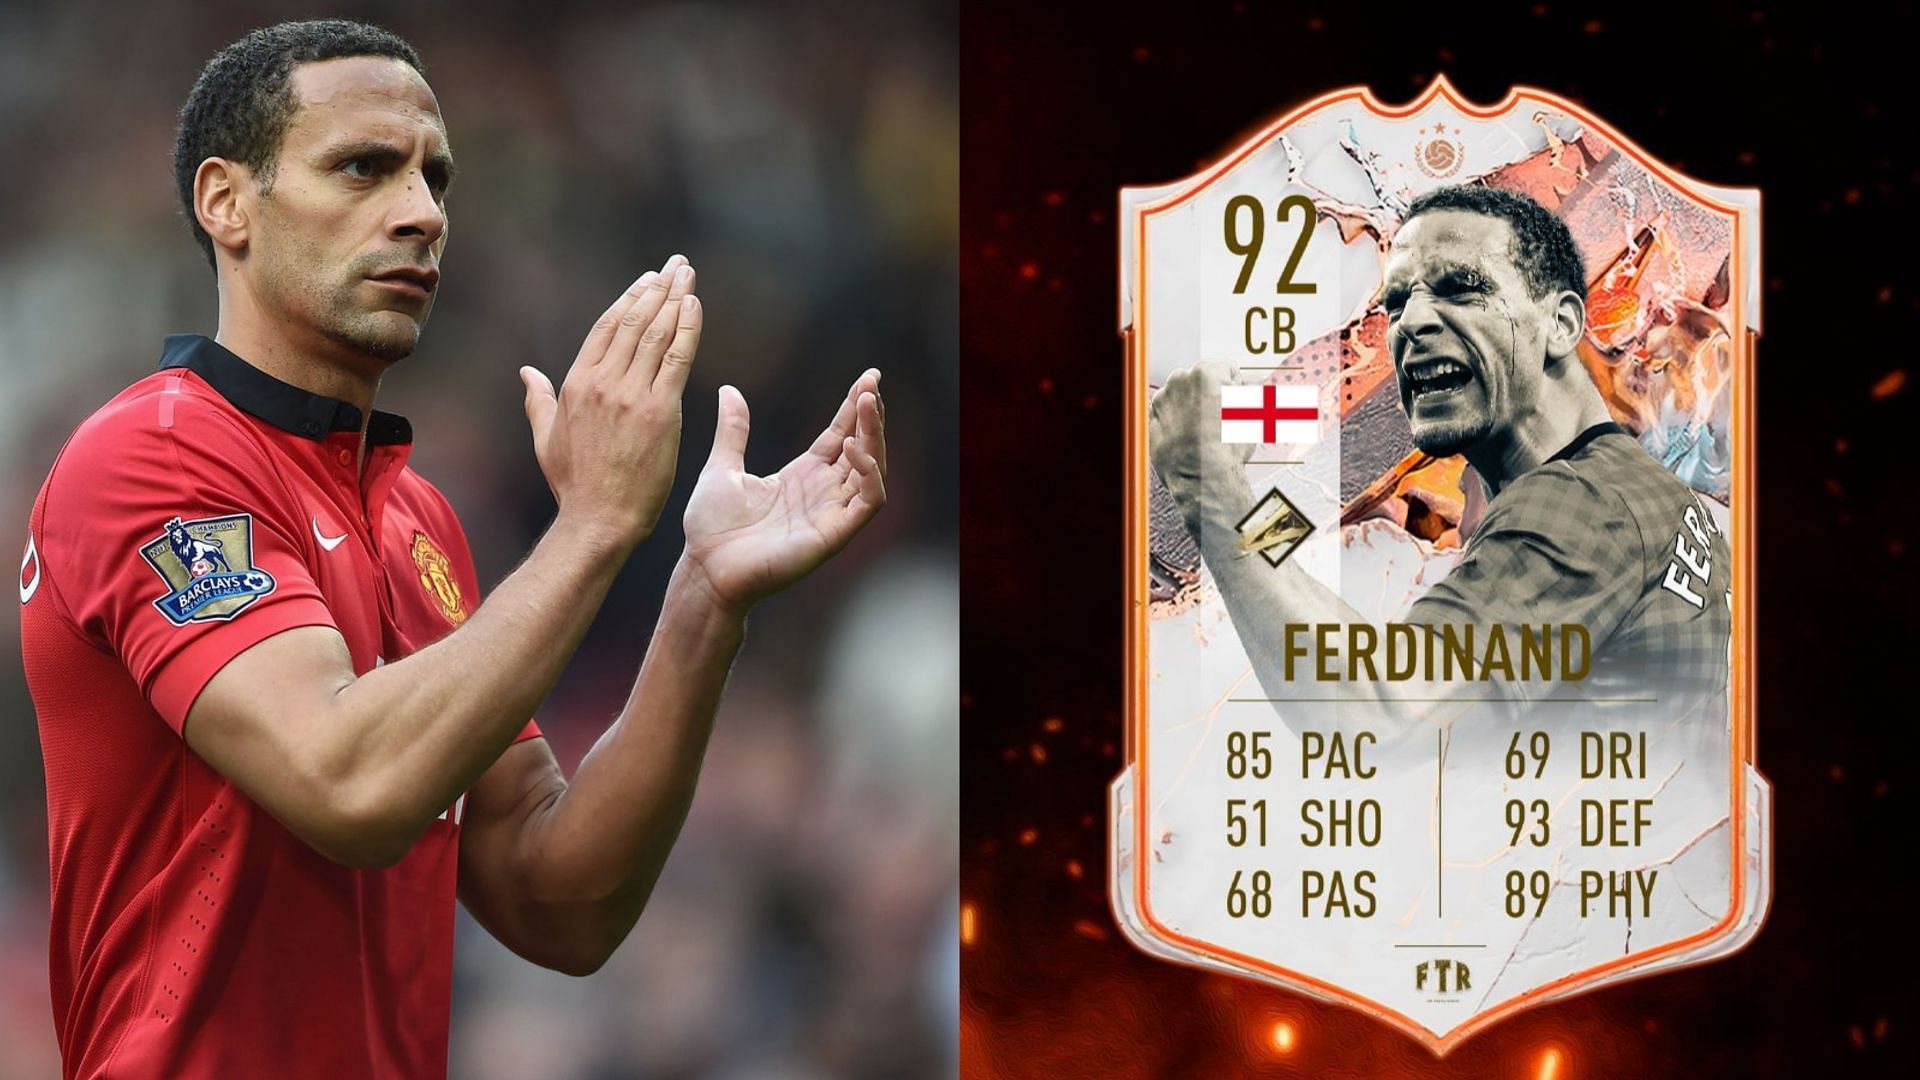 Rio Ferdinand&rsquo;s rumored Trophy Titans card could have very high demand in FIFA 23 Ultimate Team (Images via The Independent, Twitter/FTR)